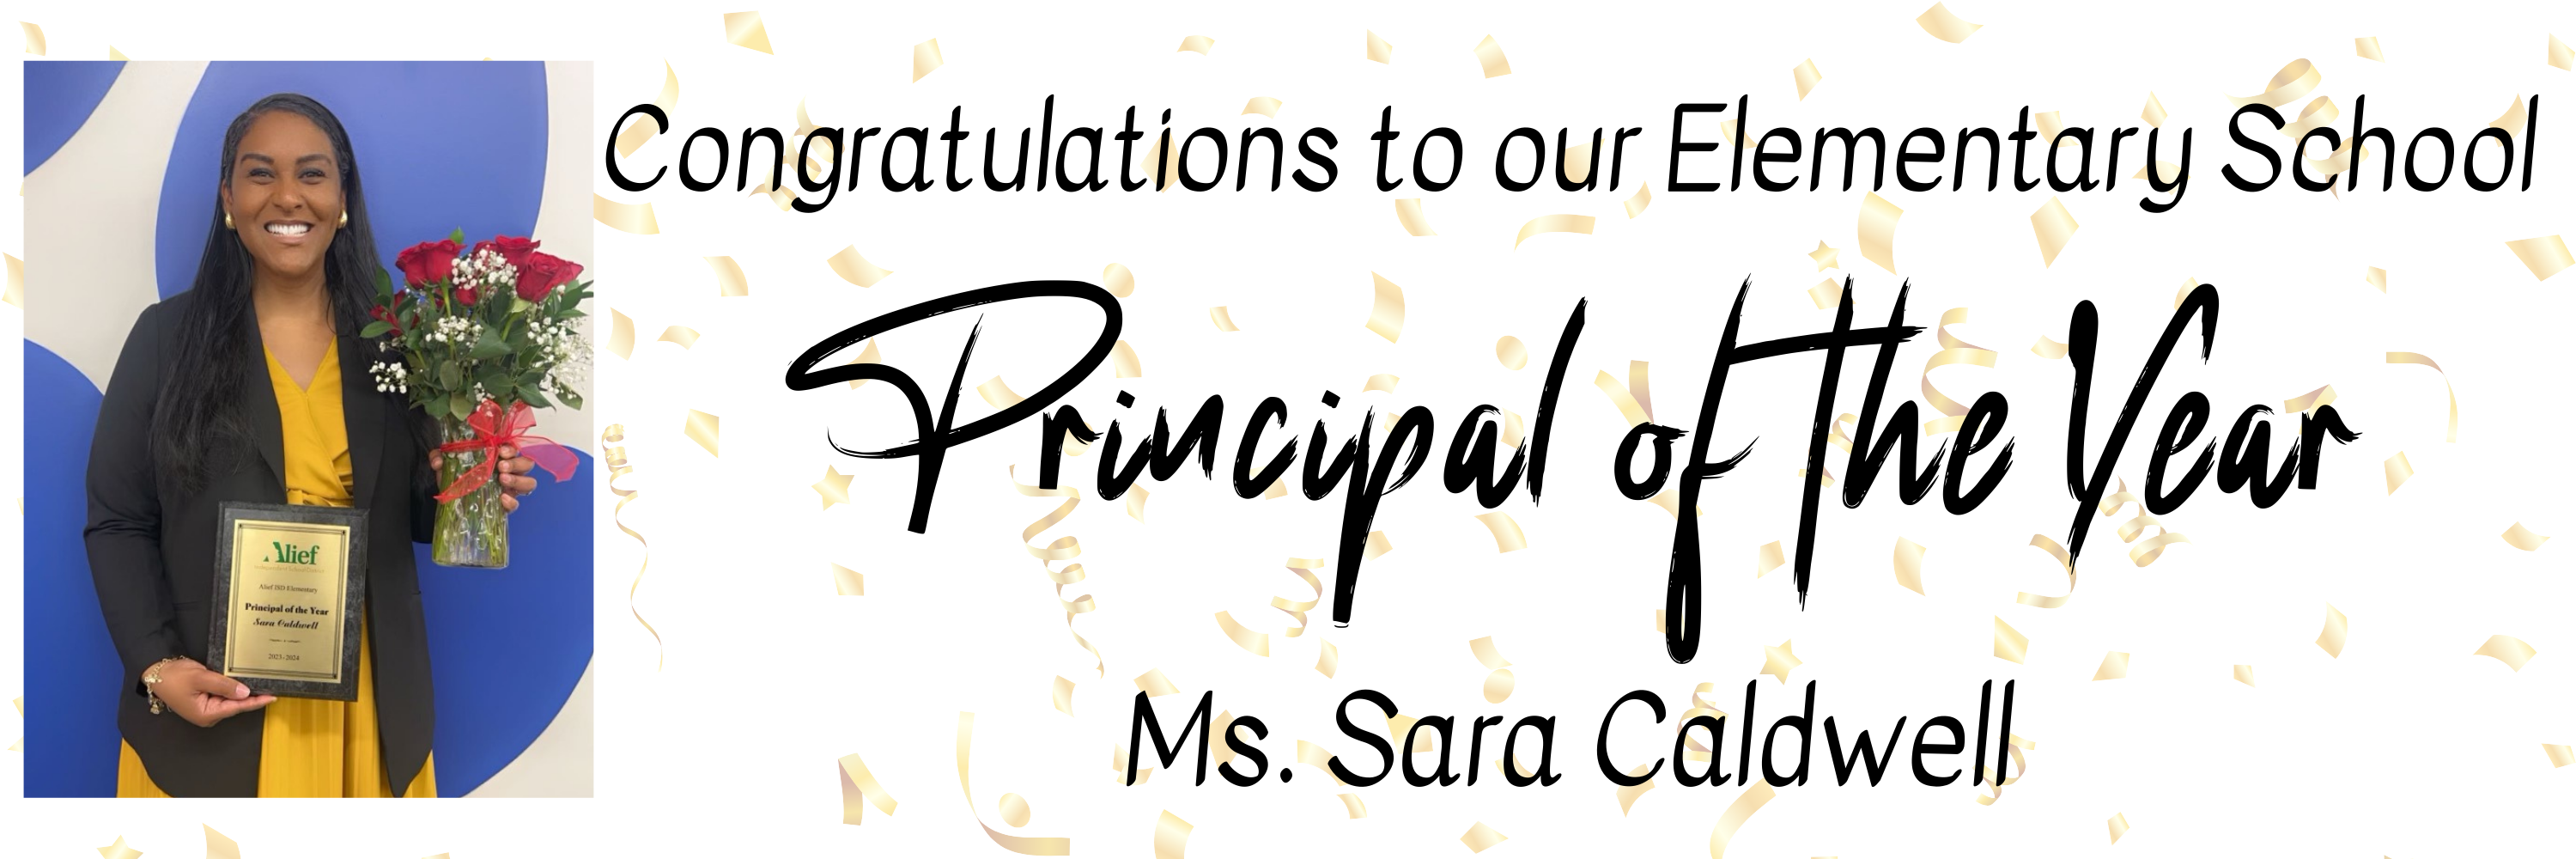 Congratulations to our Elementary School Principal of the Year Ms. Sara Caldwell!